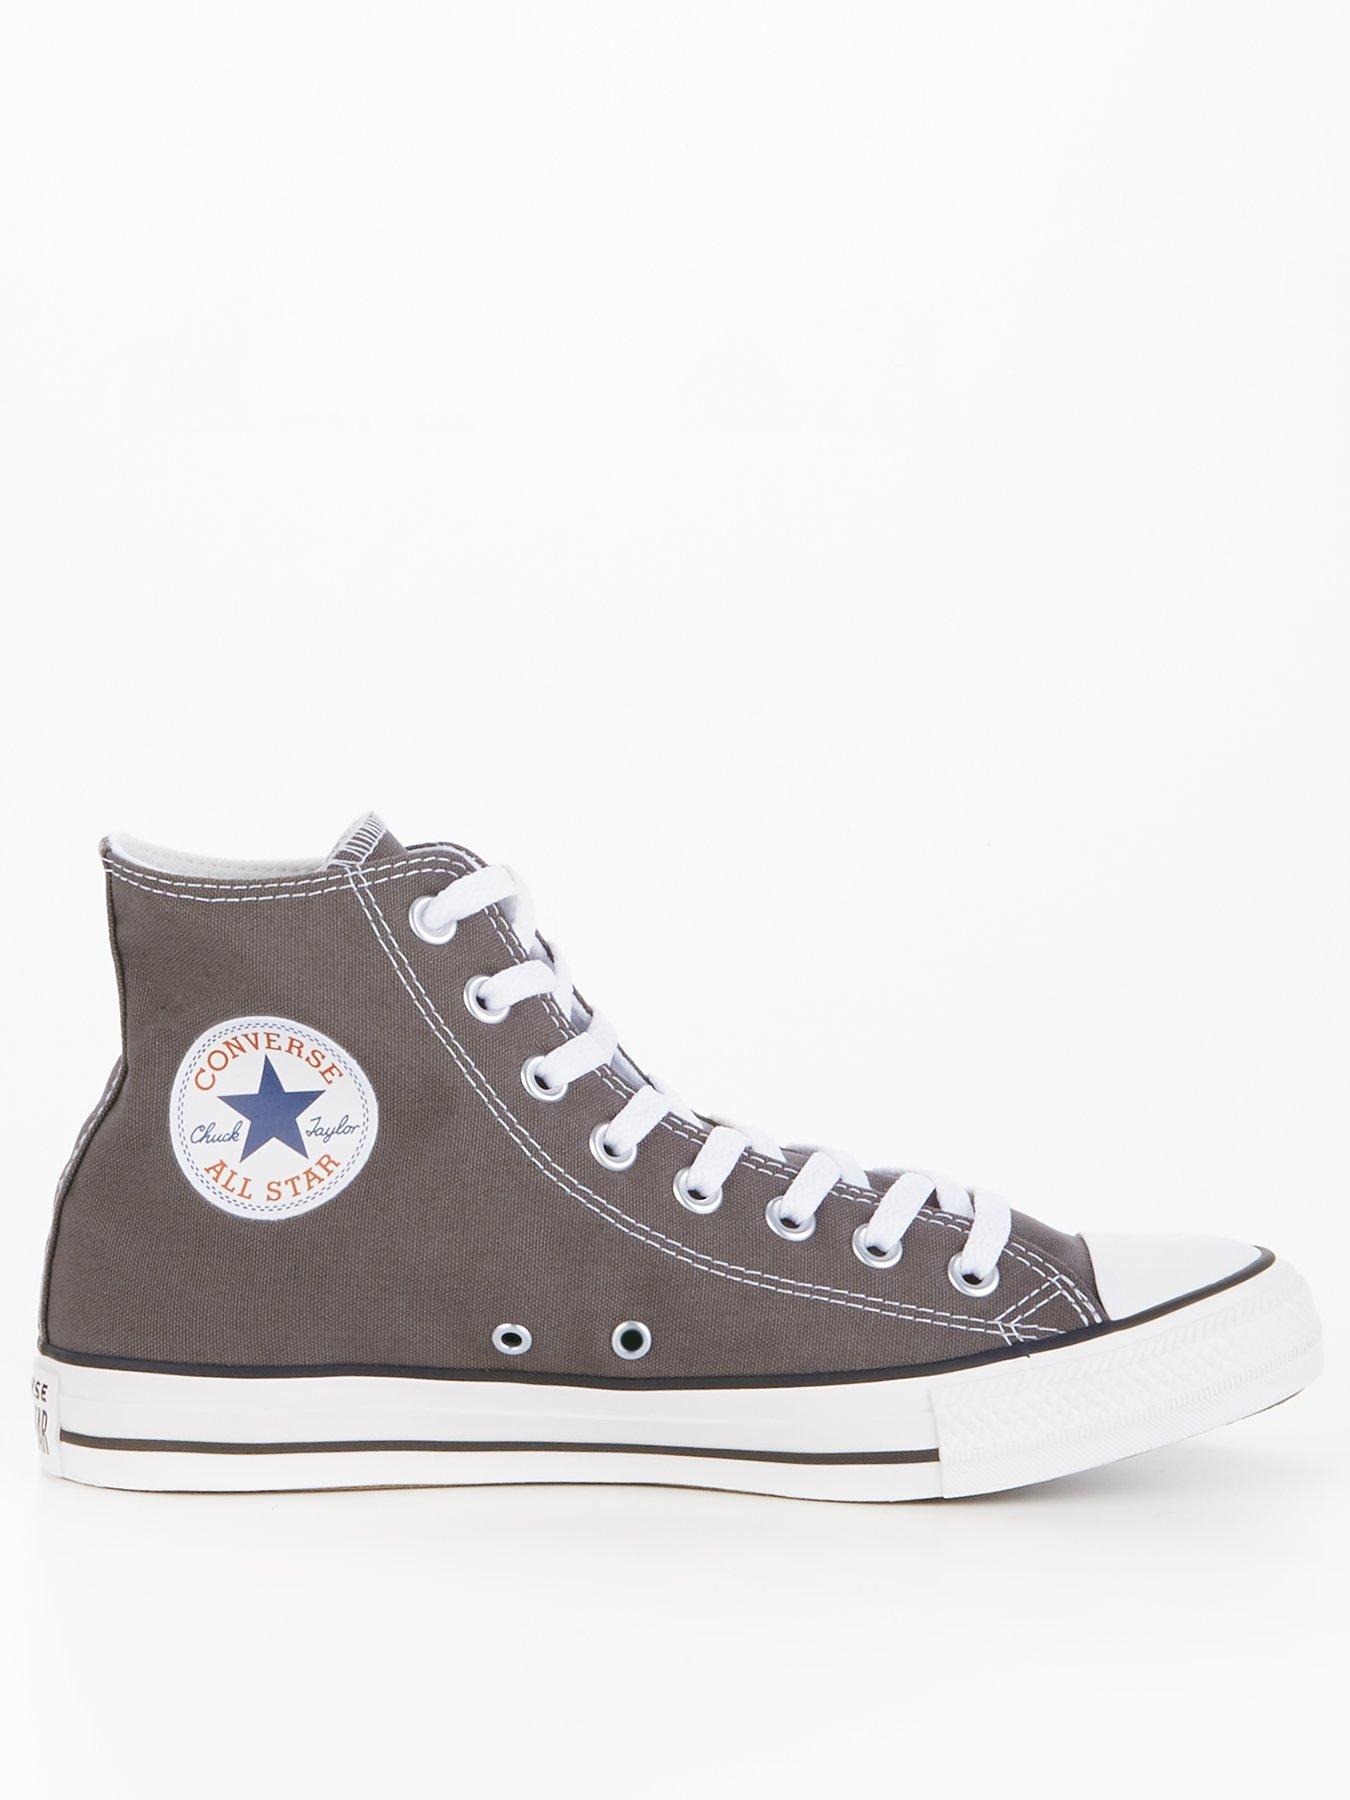 excentrisk Studiet virkningsfuldhed Converse Chuck Taylor All Star Hi-Tops - Charcoal | Very Ireland